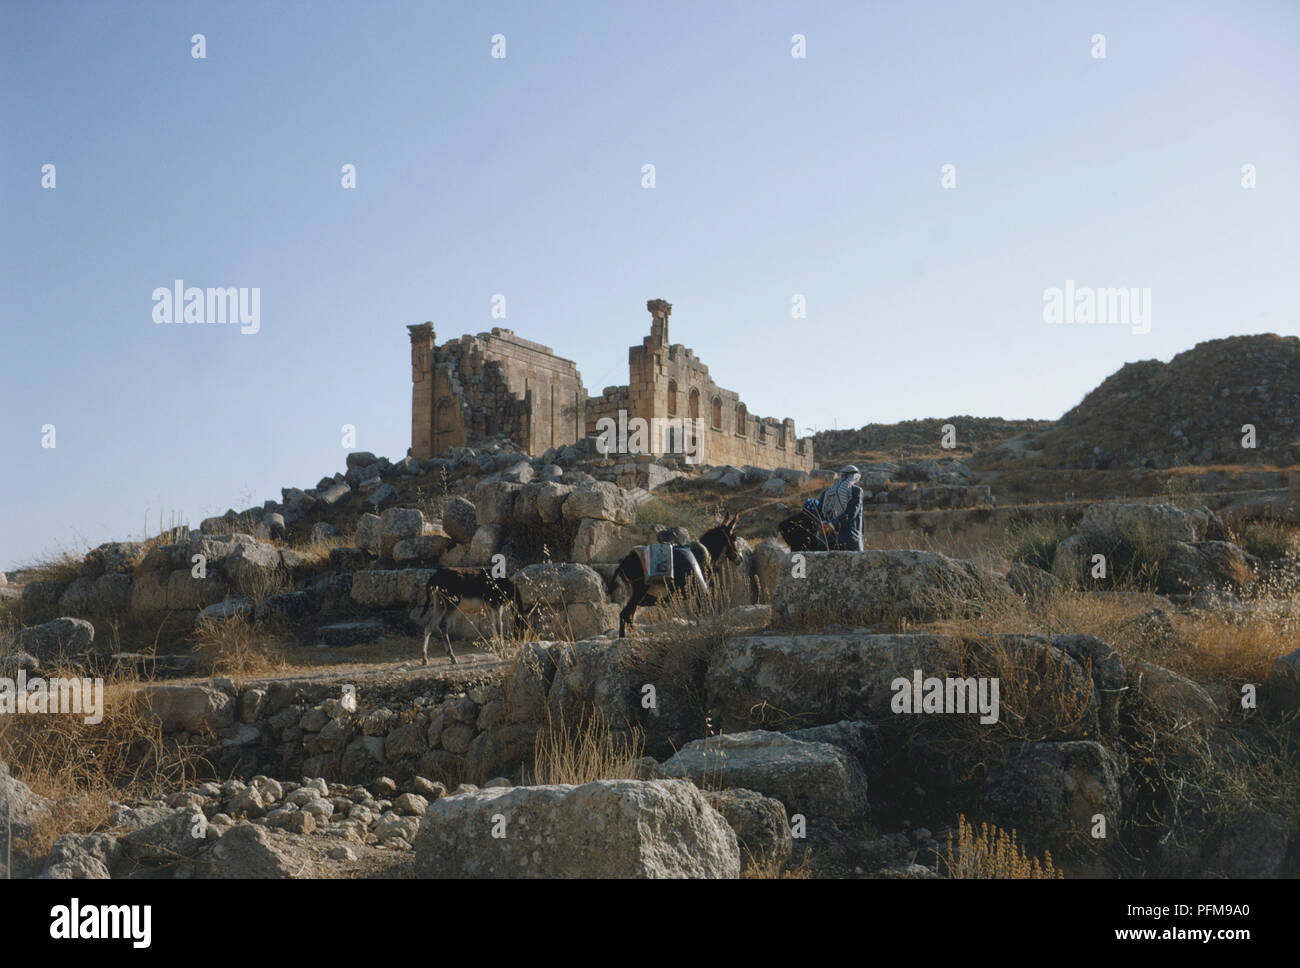 Jordan, Bedouin and donkeys near the Temple of Zeus, at the ancient Roman site of Jerash, 48 km north of Amman, one of the largest and most well-preserved sites of Roman architecture in the world today outside Italy. Stock Photo